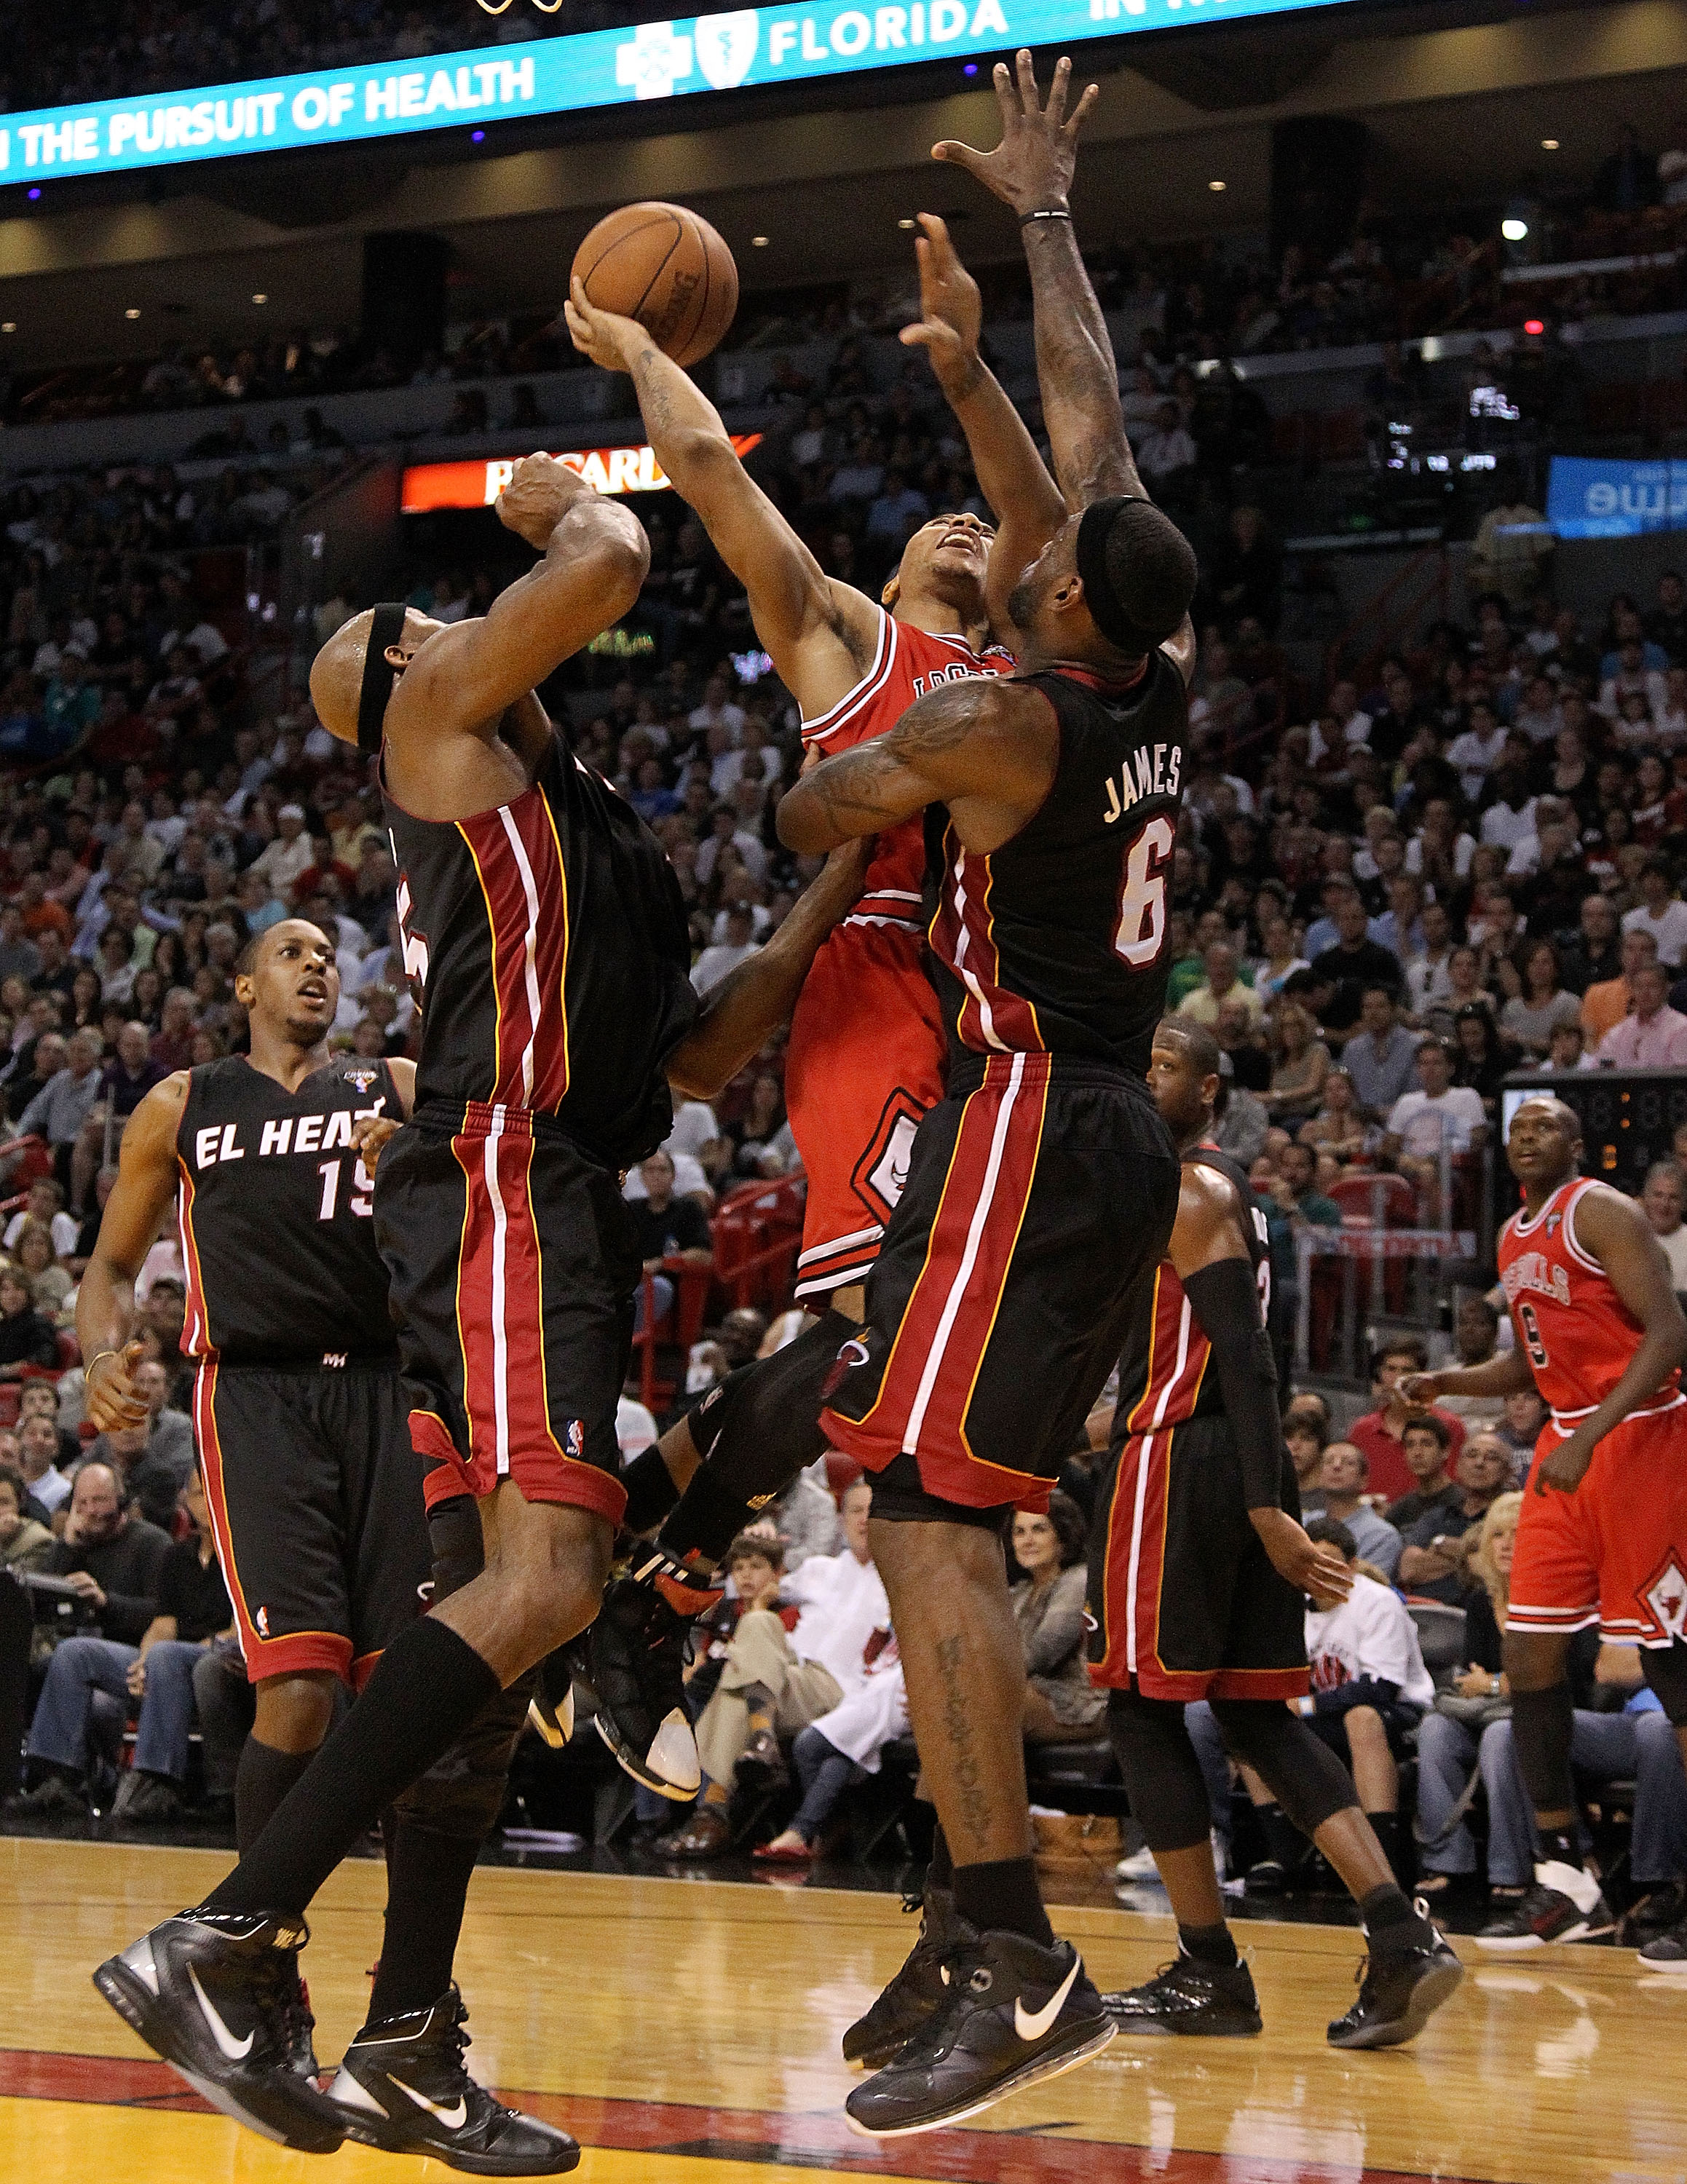 Video: Heat's LeBron James throws down poster dunk on Hawks' Paul